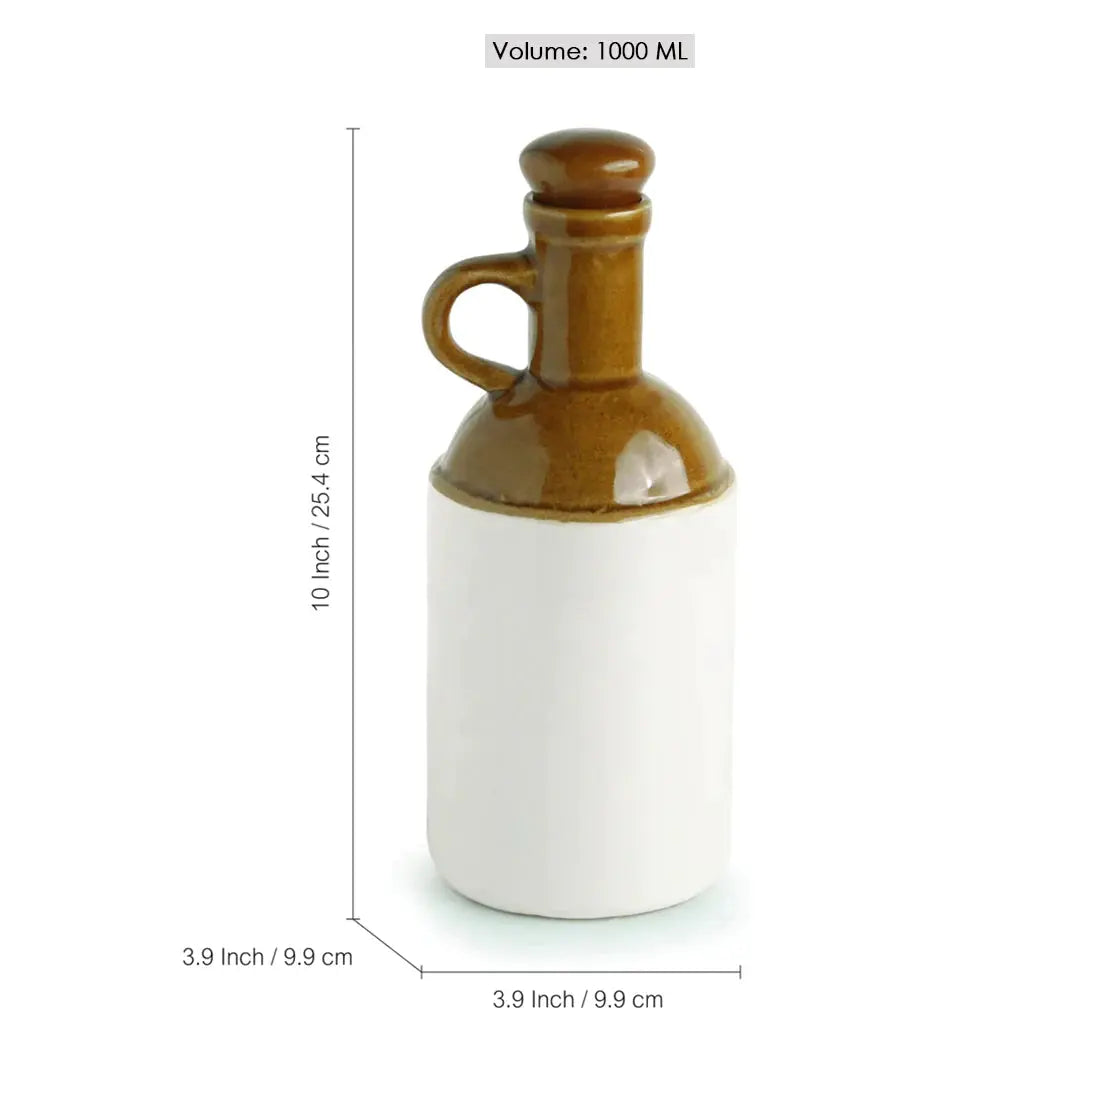 The 'Old Fashioned' Hand Glazed Studio Pottery Ceramic Oil Bottle (1000 ML) simple BUTMEE. 